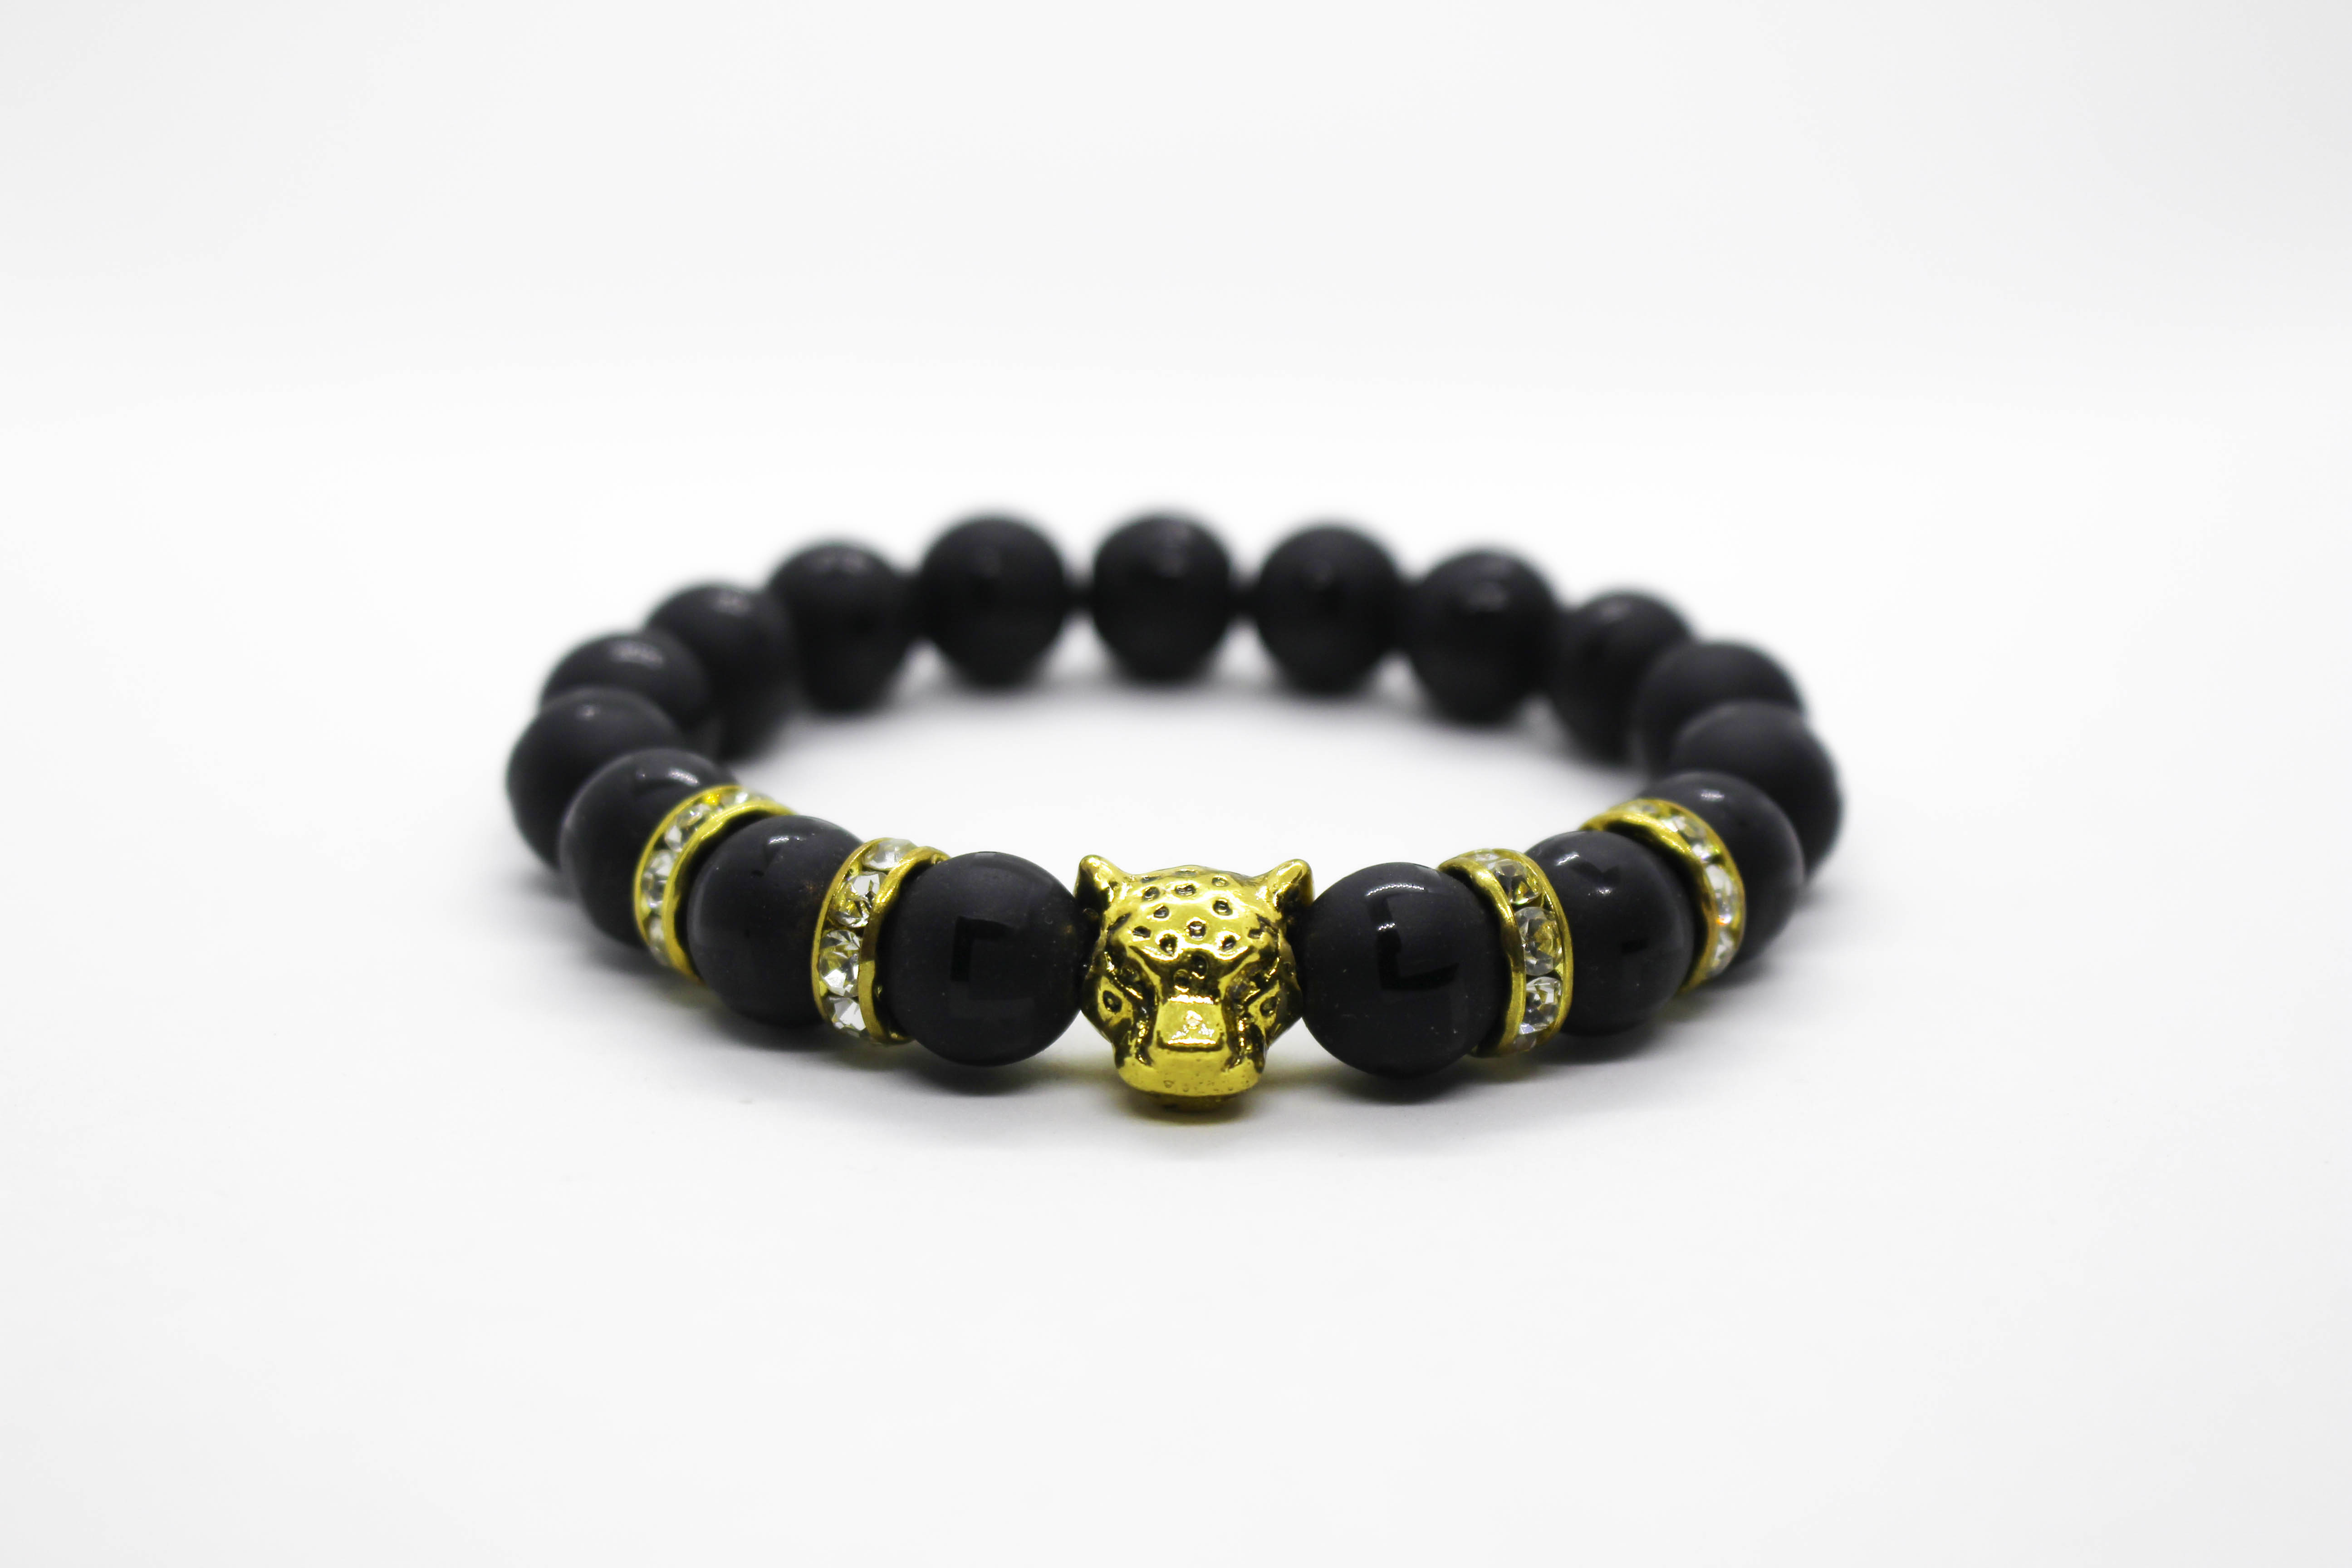 Black Panther Bracelet With Gold Panther Head (Onyx Crystal) 10mm Beads ...